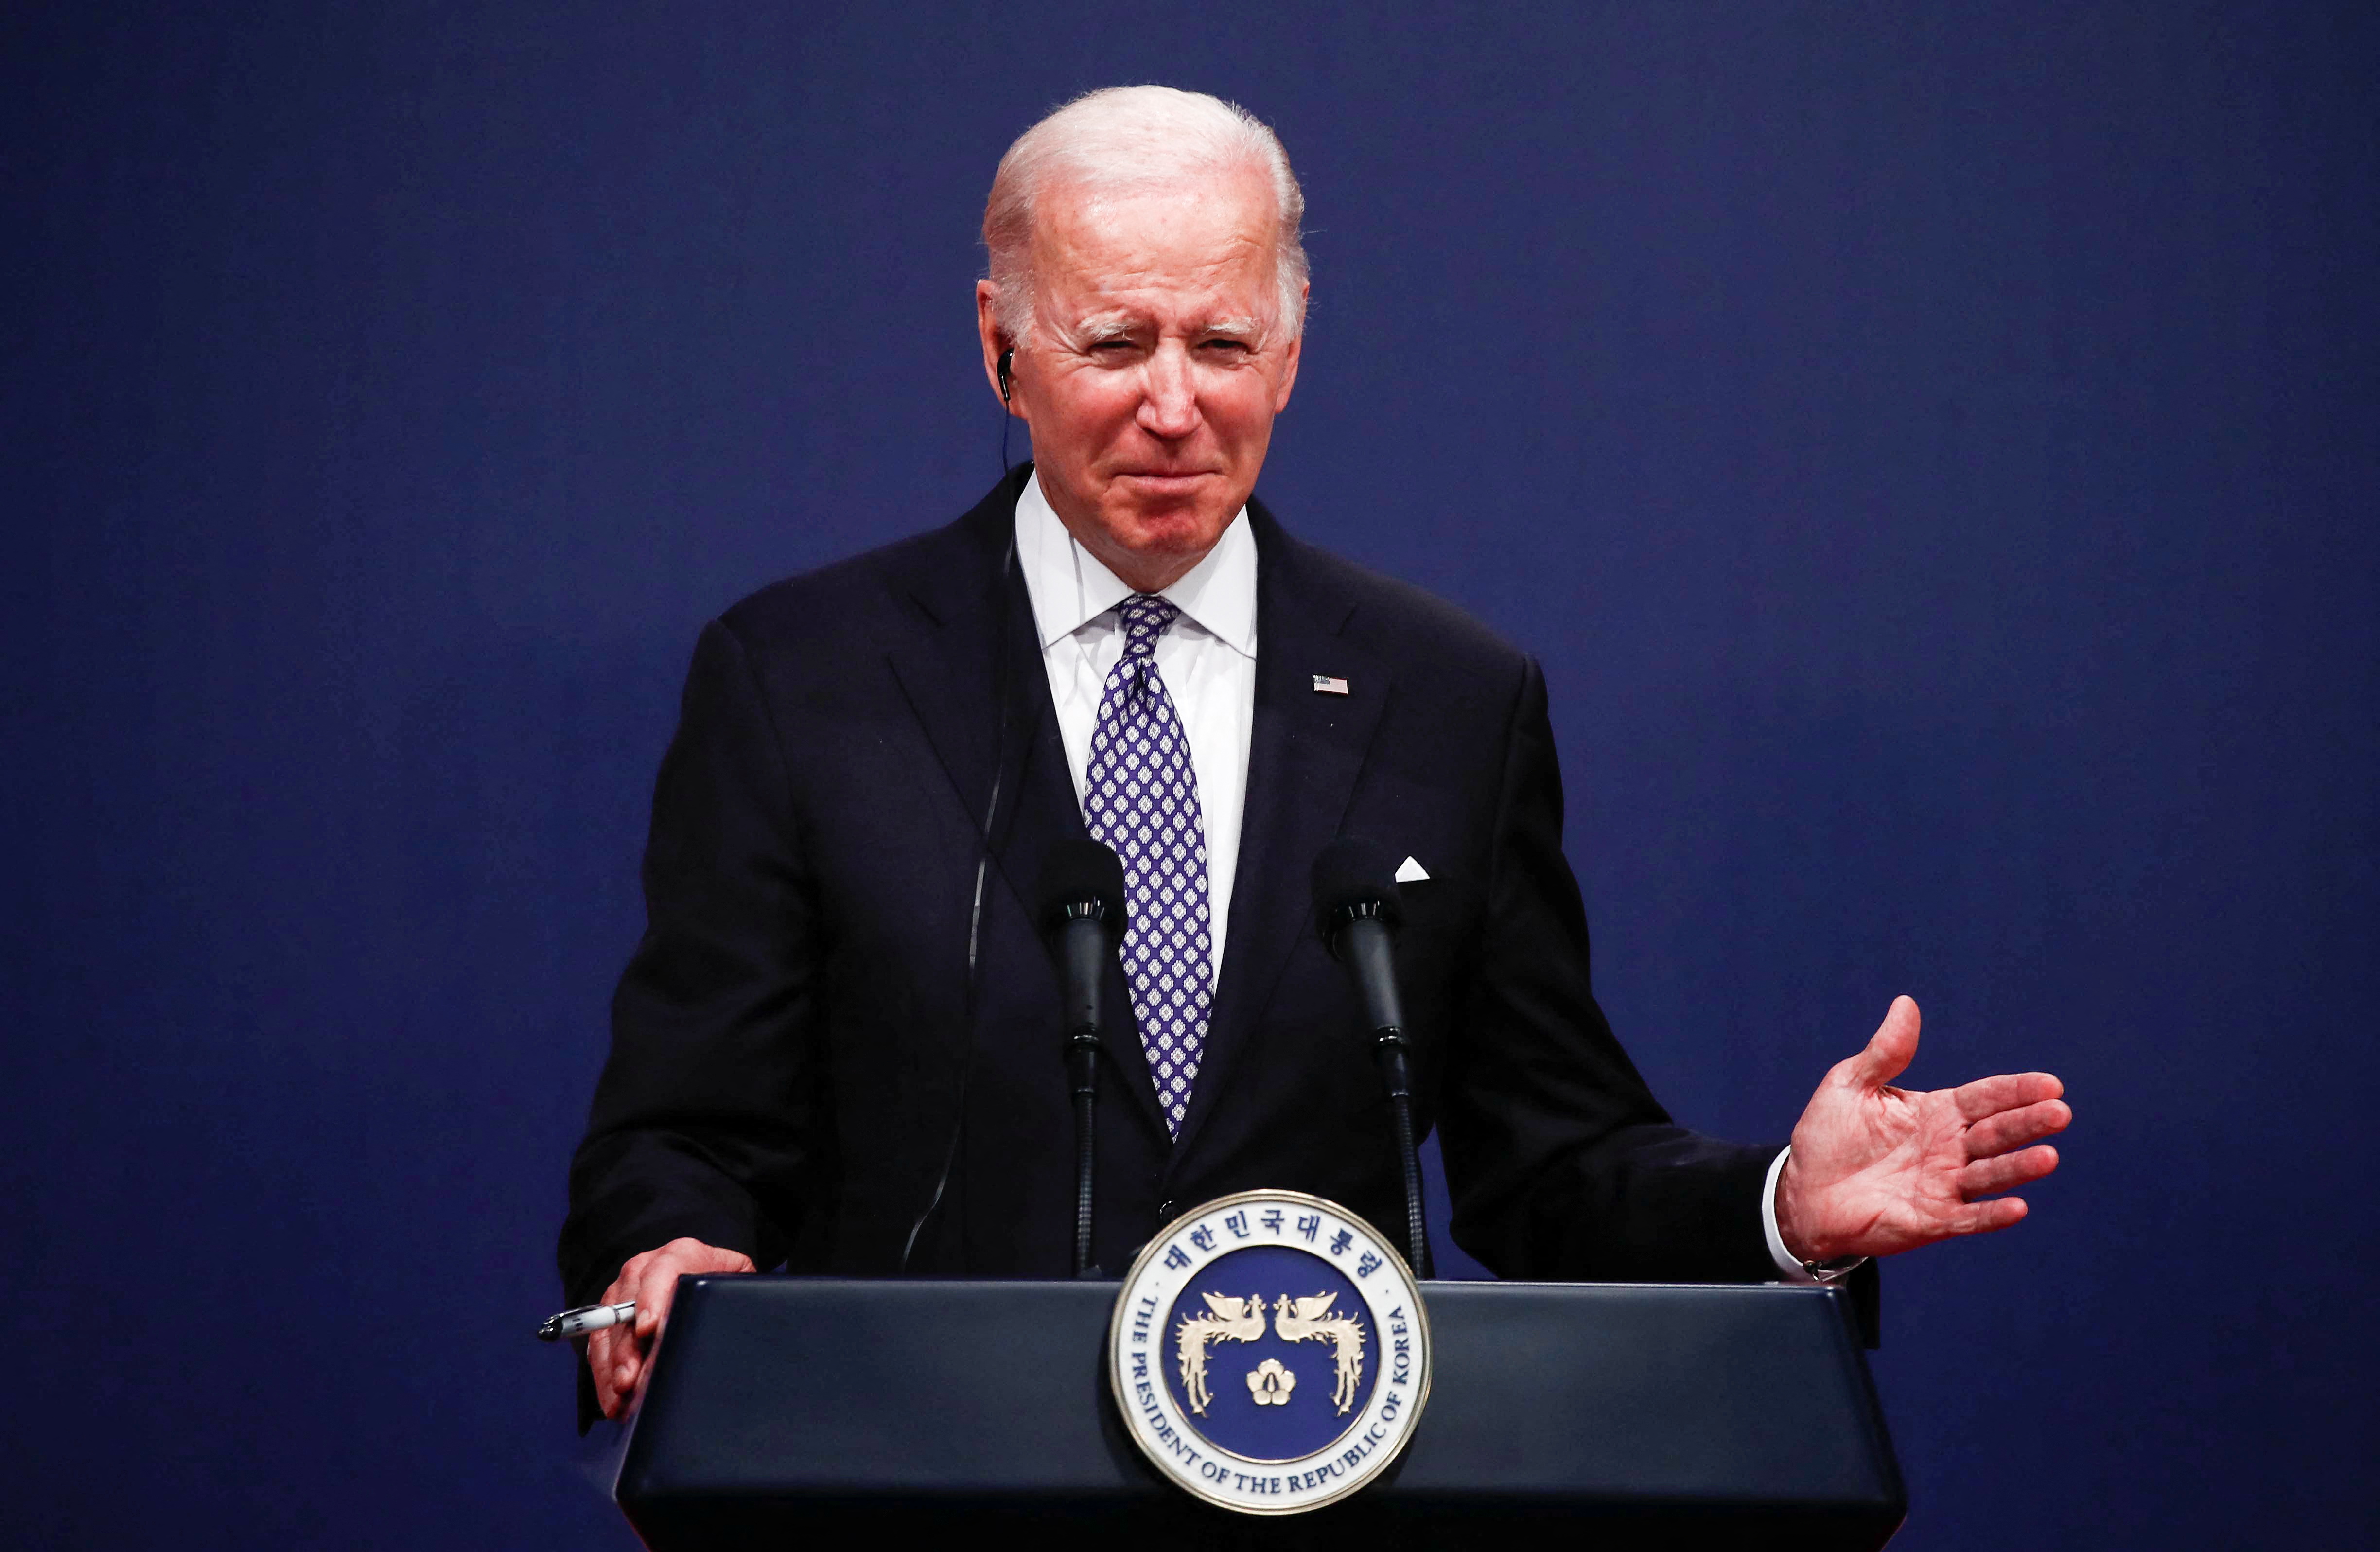 U.S. President Joe Biden reacts during a joint news conference with South Korean President Yoon Suk-yeol at the presidential office in Seoul, South Korea, May 21, 2022. Jeon Heon-Kyun/Pool via REUTERS